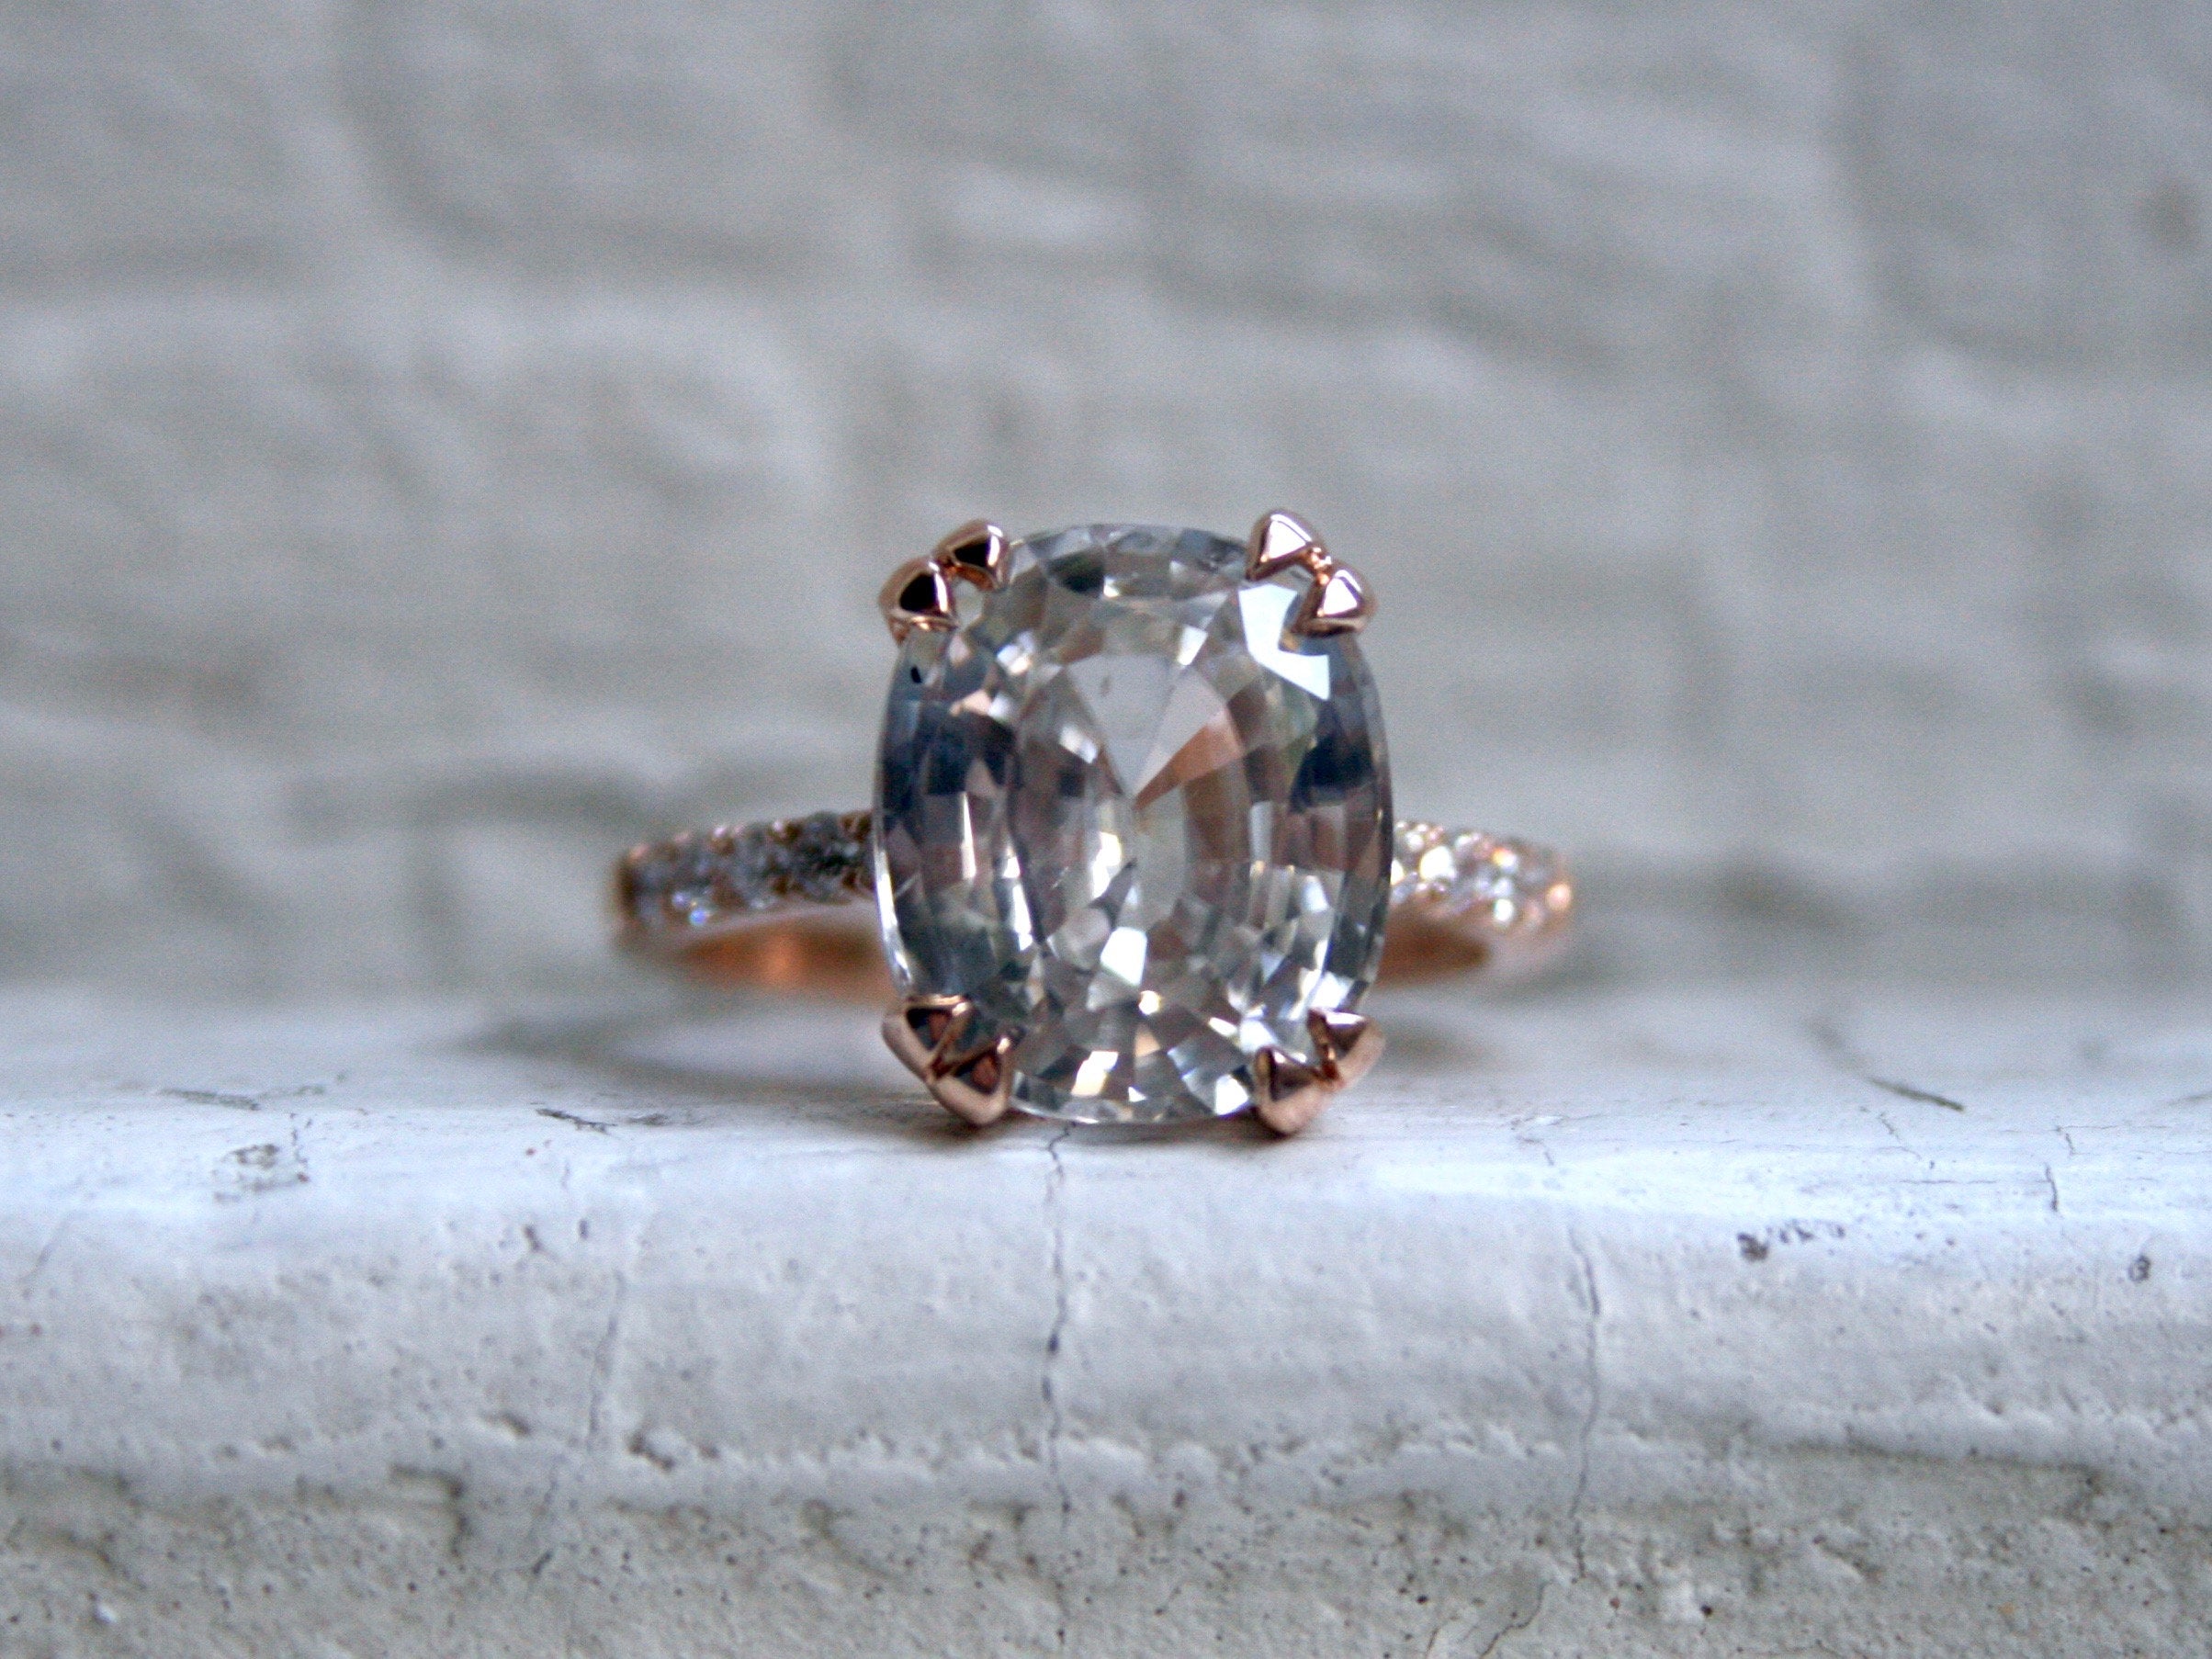 Beautiful Pave Diamond and Zircon Ring in 14K Rose Gold.